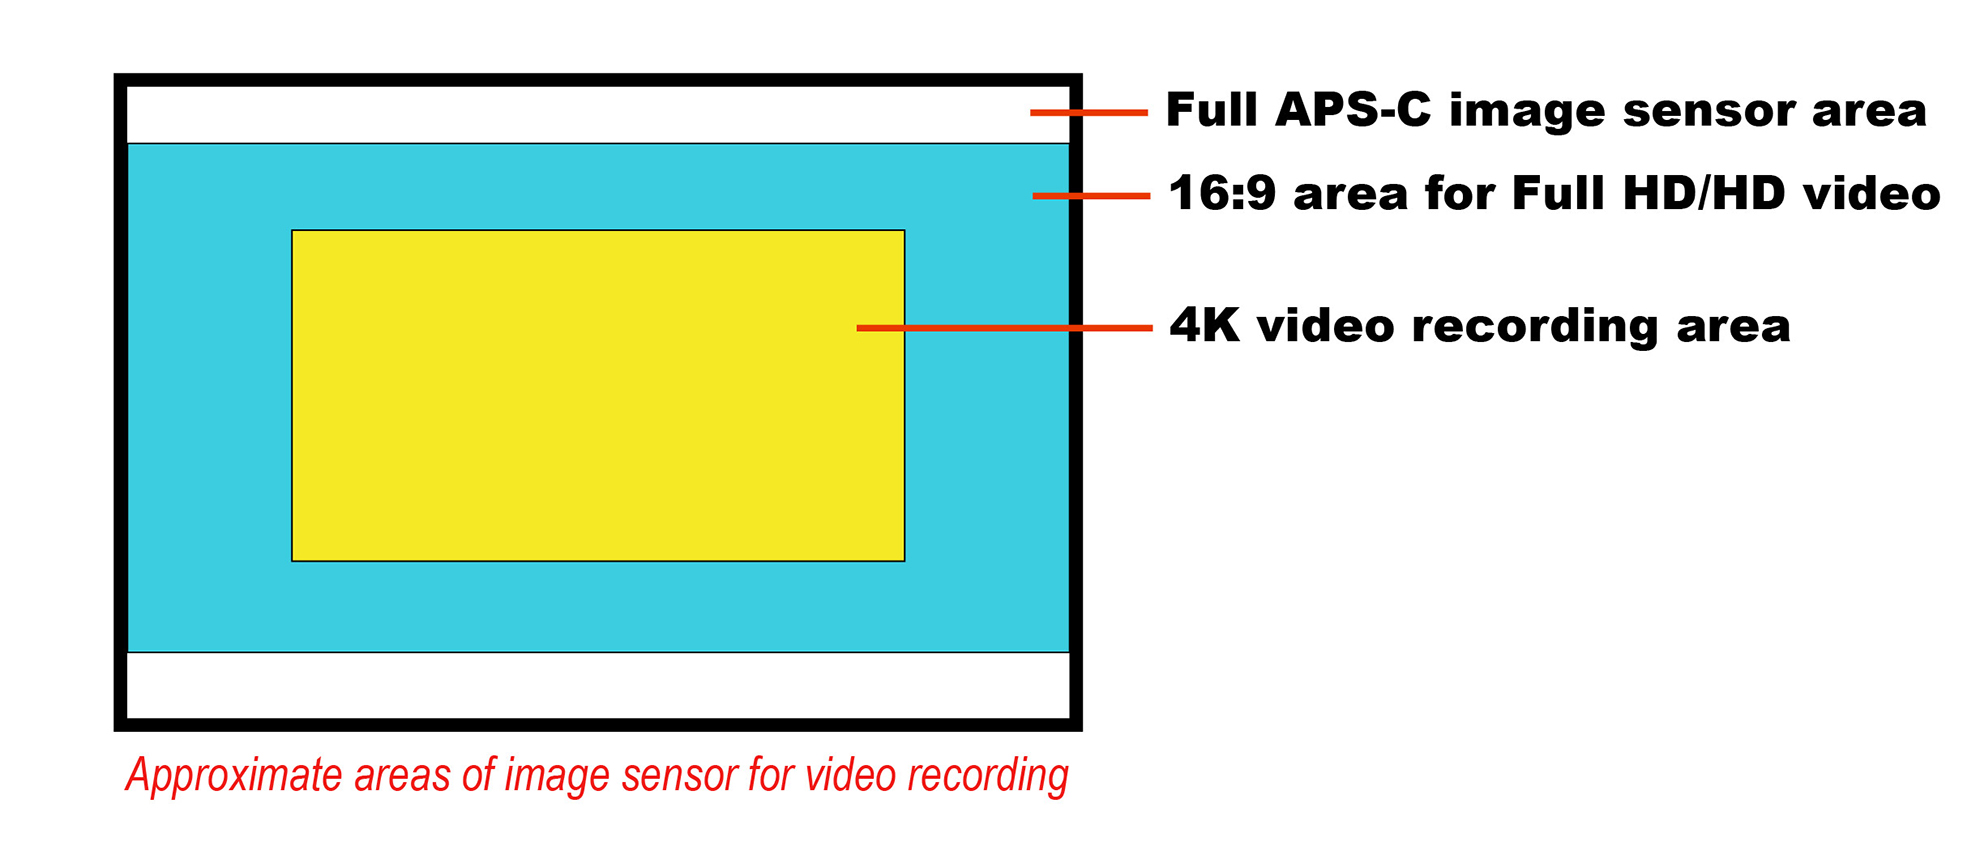 Approximate areas of image sensor for video recording